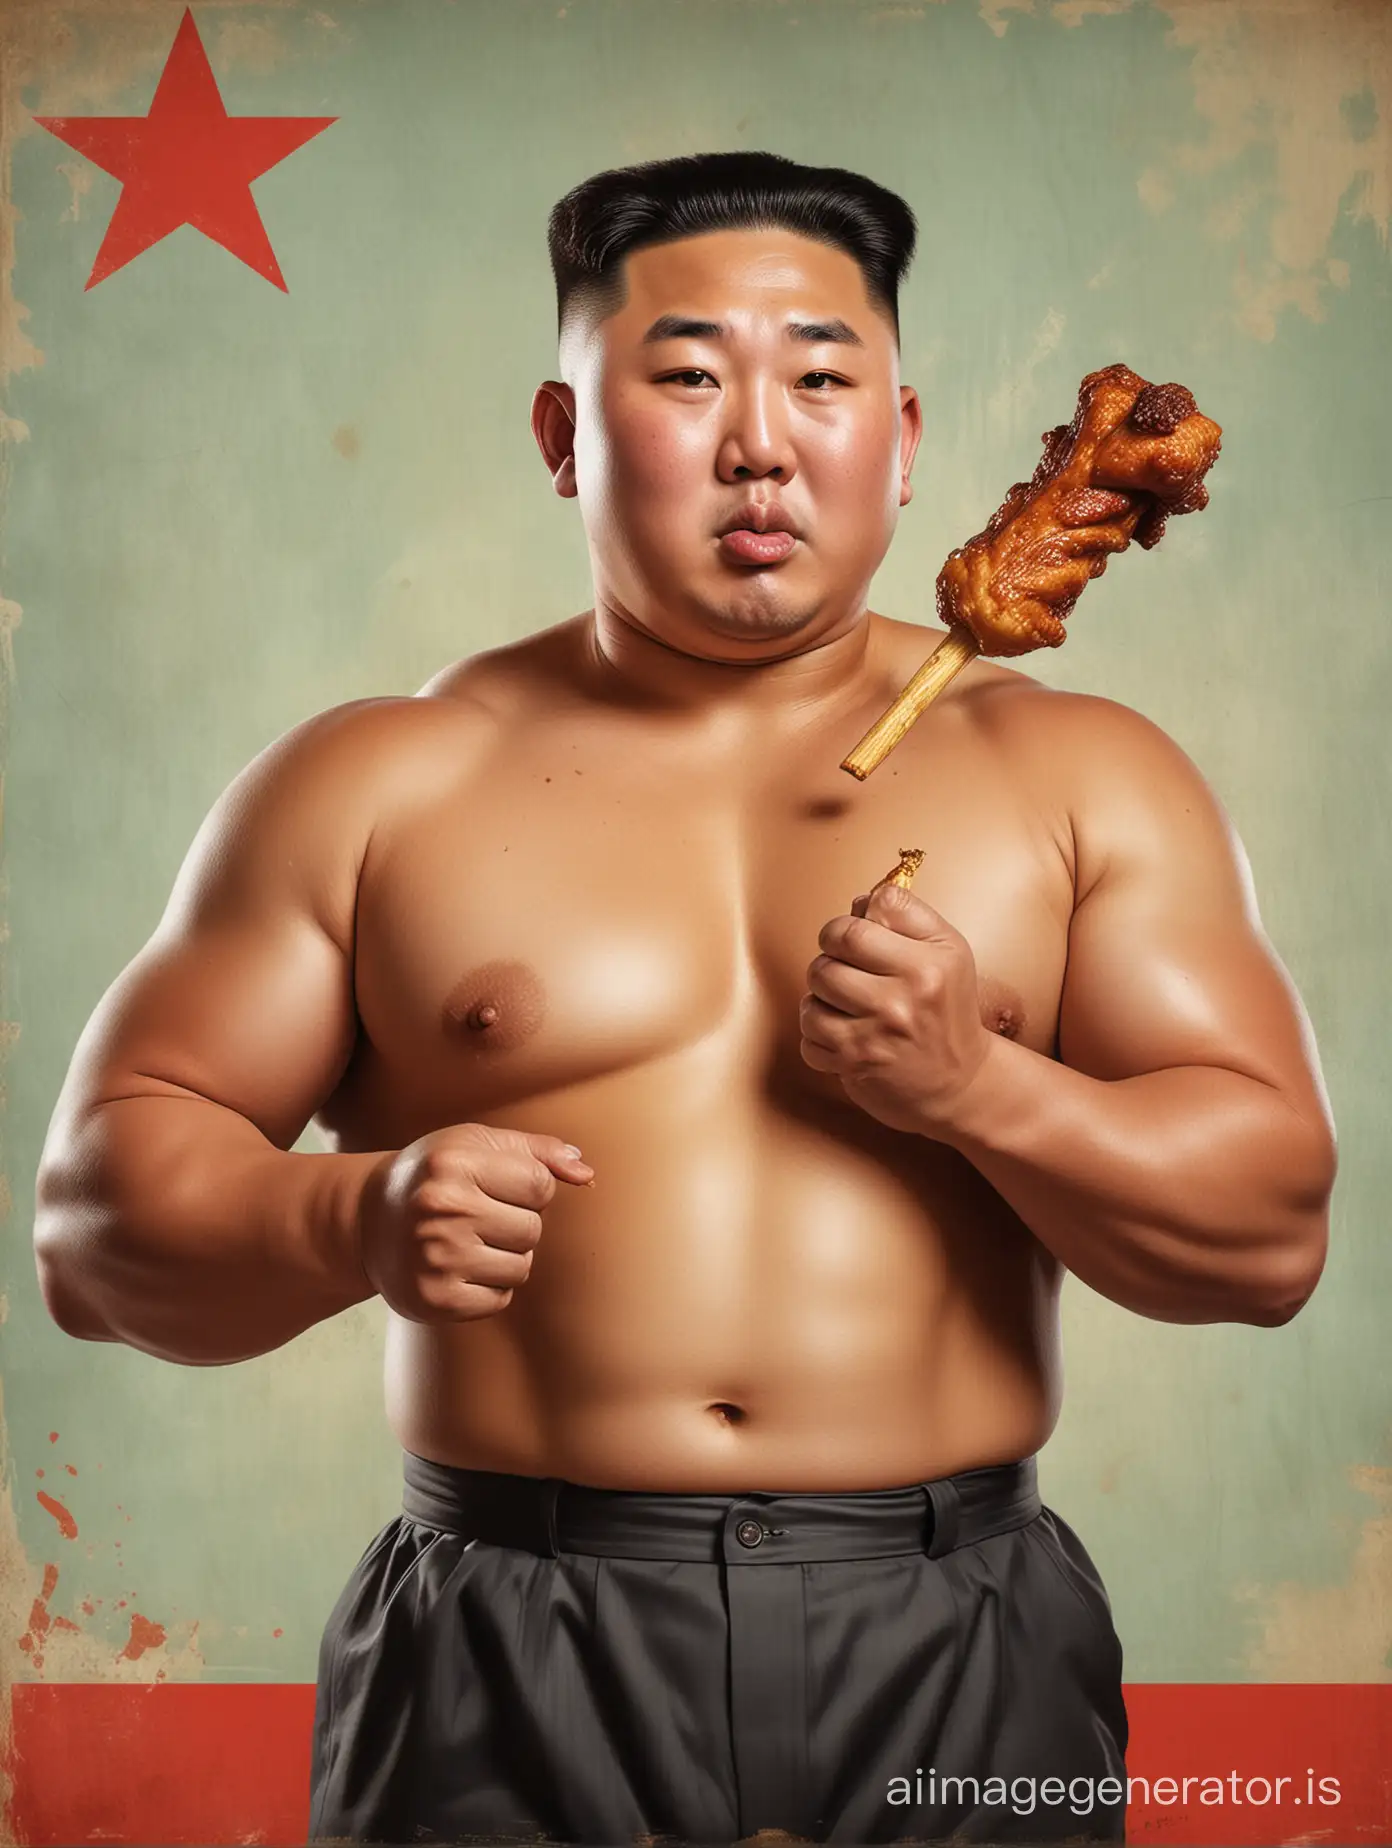 Portrait of Kim jong un as a muscly bodybuilder eating chicken drumsticks in the style of a vintage North Korean communist propaganda poster